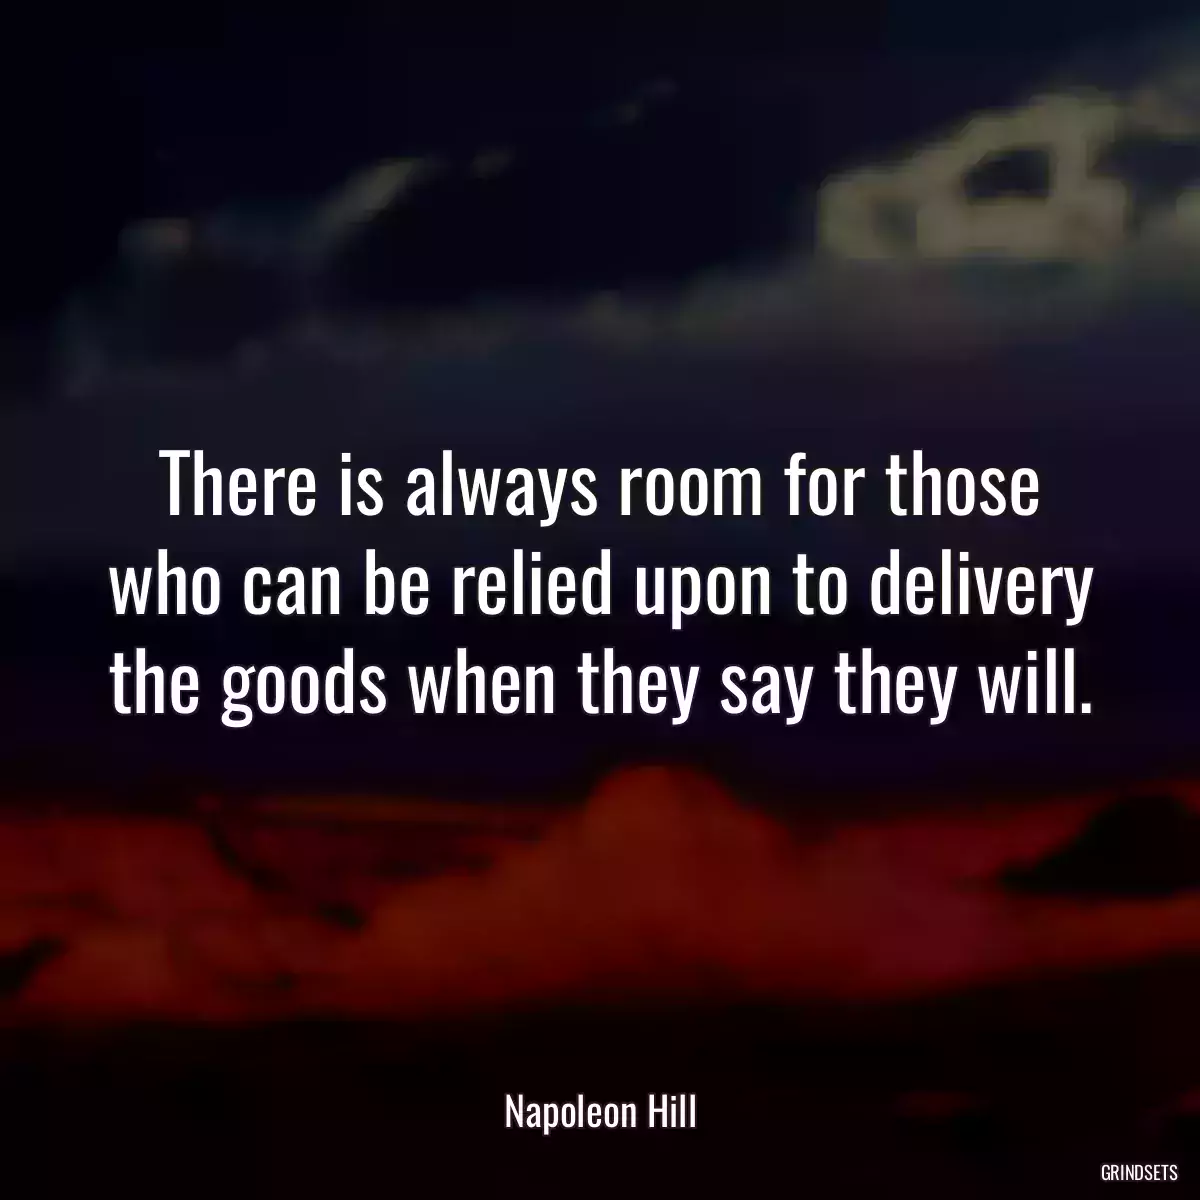 There is always room for those who can be relied upon to delivery the goods when they say they will.